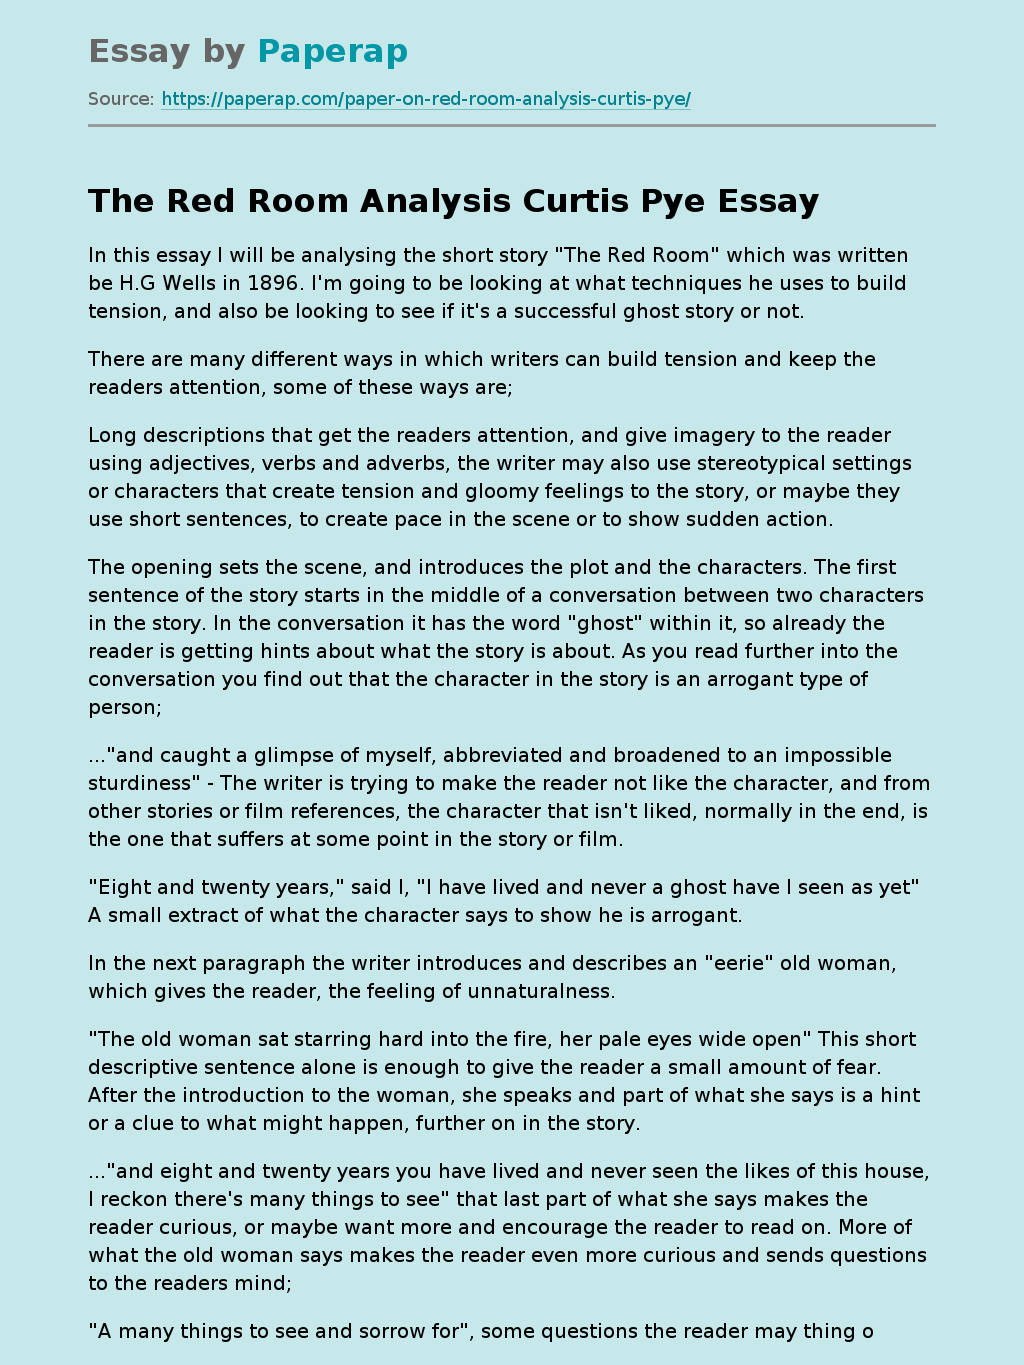 The Red Room Analysis Curtis Pye